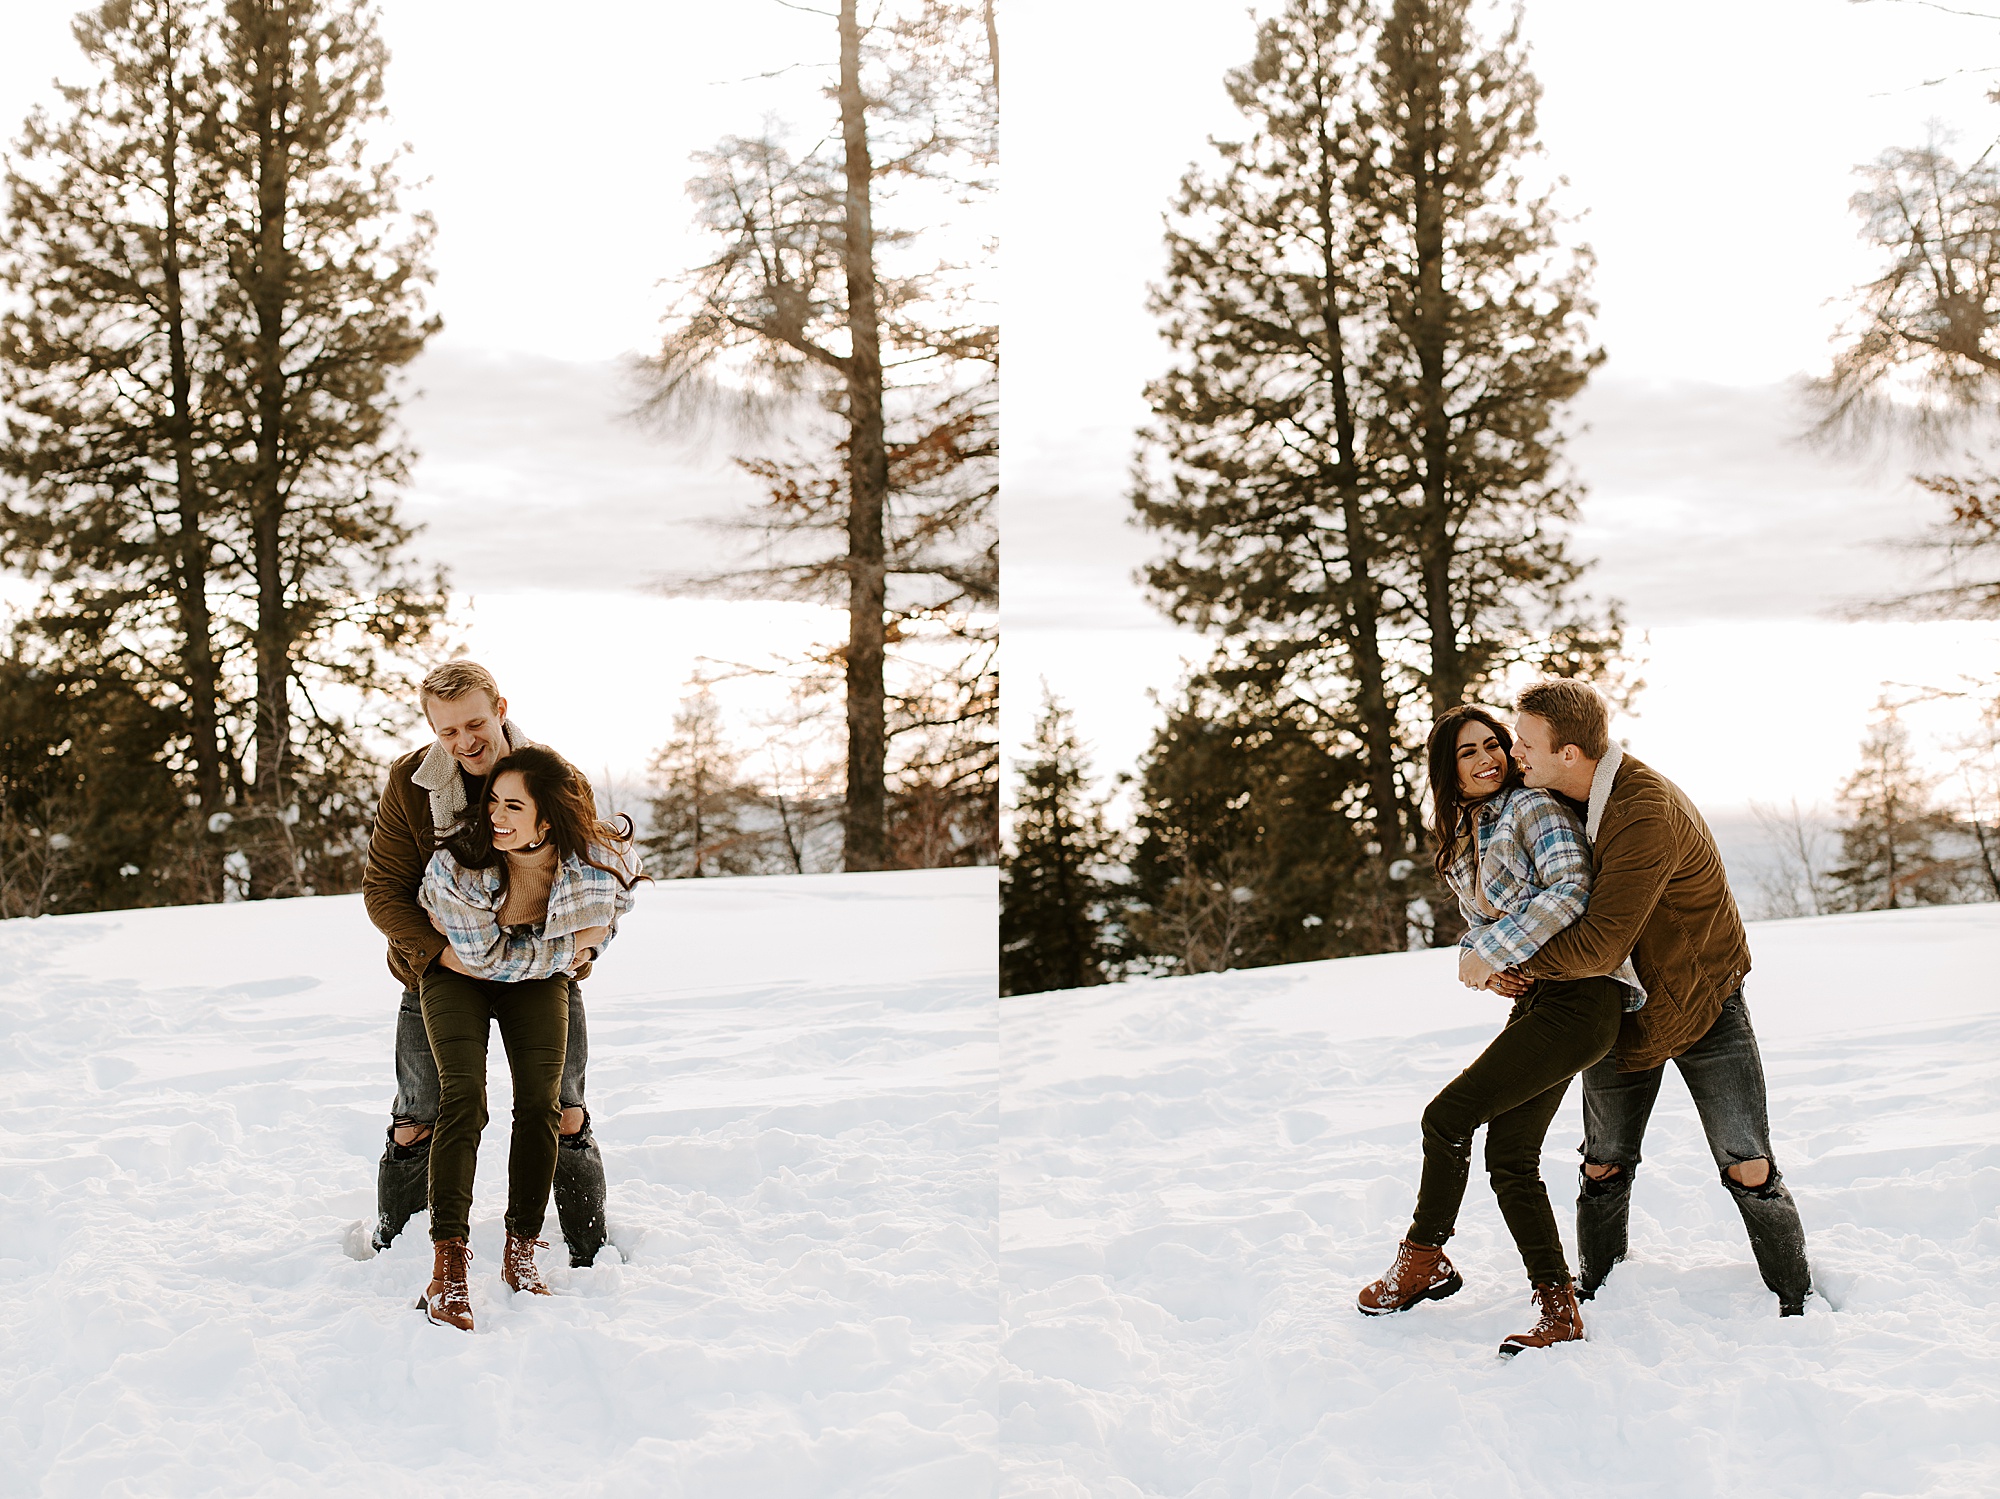 snowy mountains, snow forest, snowy couples pictures, snowy engagement photos, snowy engagement pictures, snow engagement photos outfits, snow engagement pictures outfit, snowy couple pictures, snowy couple aesthetic, snowy couple, boise idaho engagement session, boise engagement session, boise engagement photos, boise idaho engagement photography, idaho engagement session, idaho engagement pictures, idaho couples session, idaho sawtooth mountains, sawtooth mountains engagement session, couples photoshoot, couples session, couples photography, couples photos, engagement session, engagement session, engagement session poses, engagement session outfit ideas, engagement session plaid shirt, engagement session winter outfit ideas